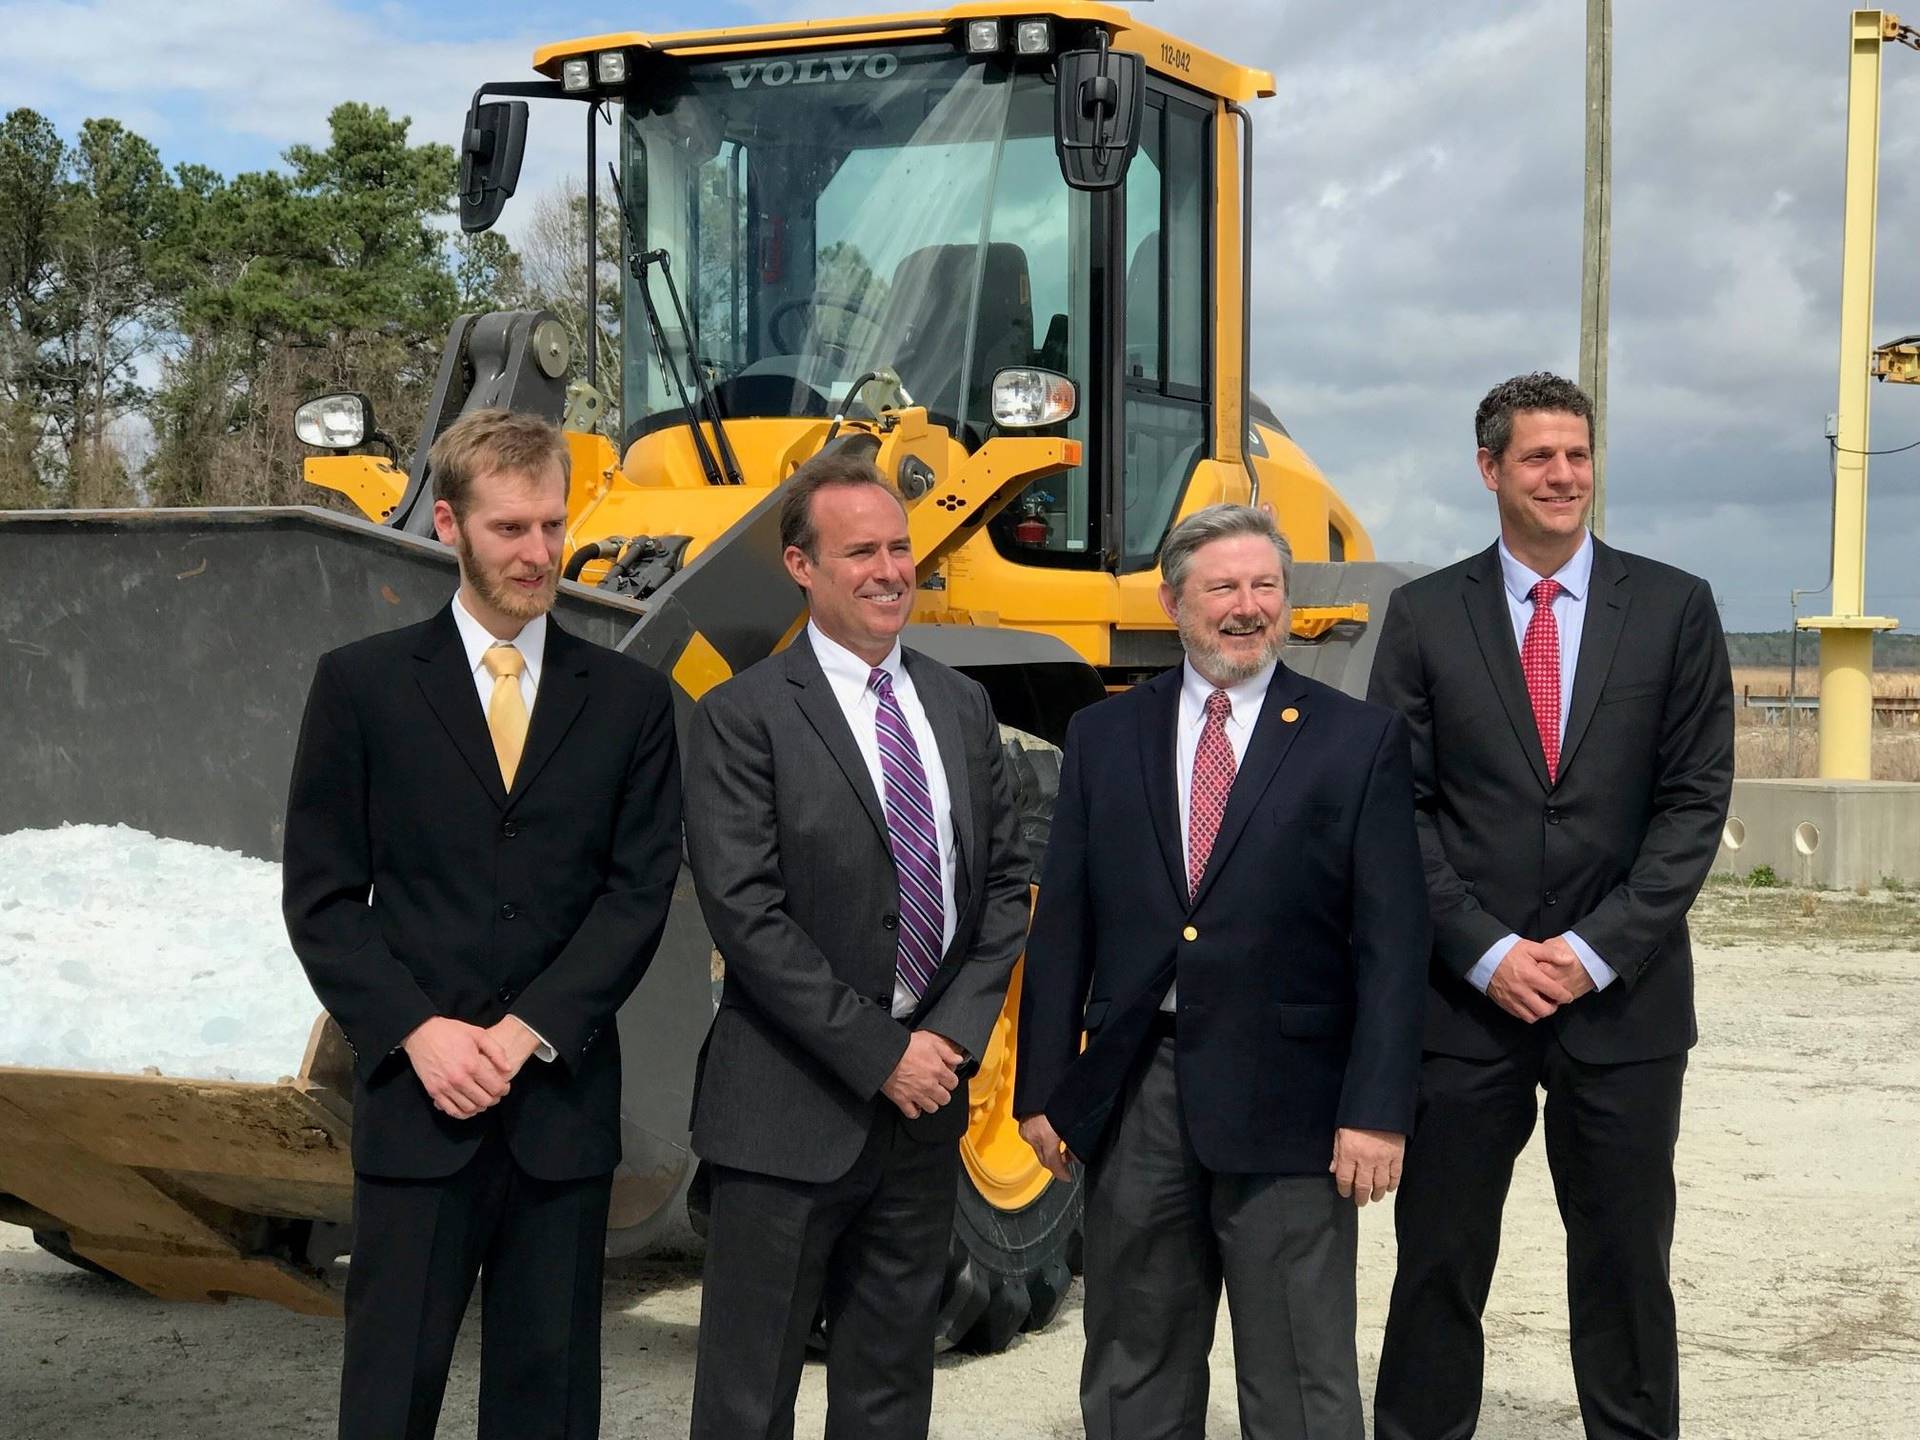 The Charleston International Manufacturing Center (CIMC) at Bushy Park, brings the first liquid sodium silicate production facility to Berkeley County, SC. 